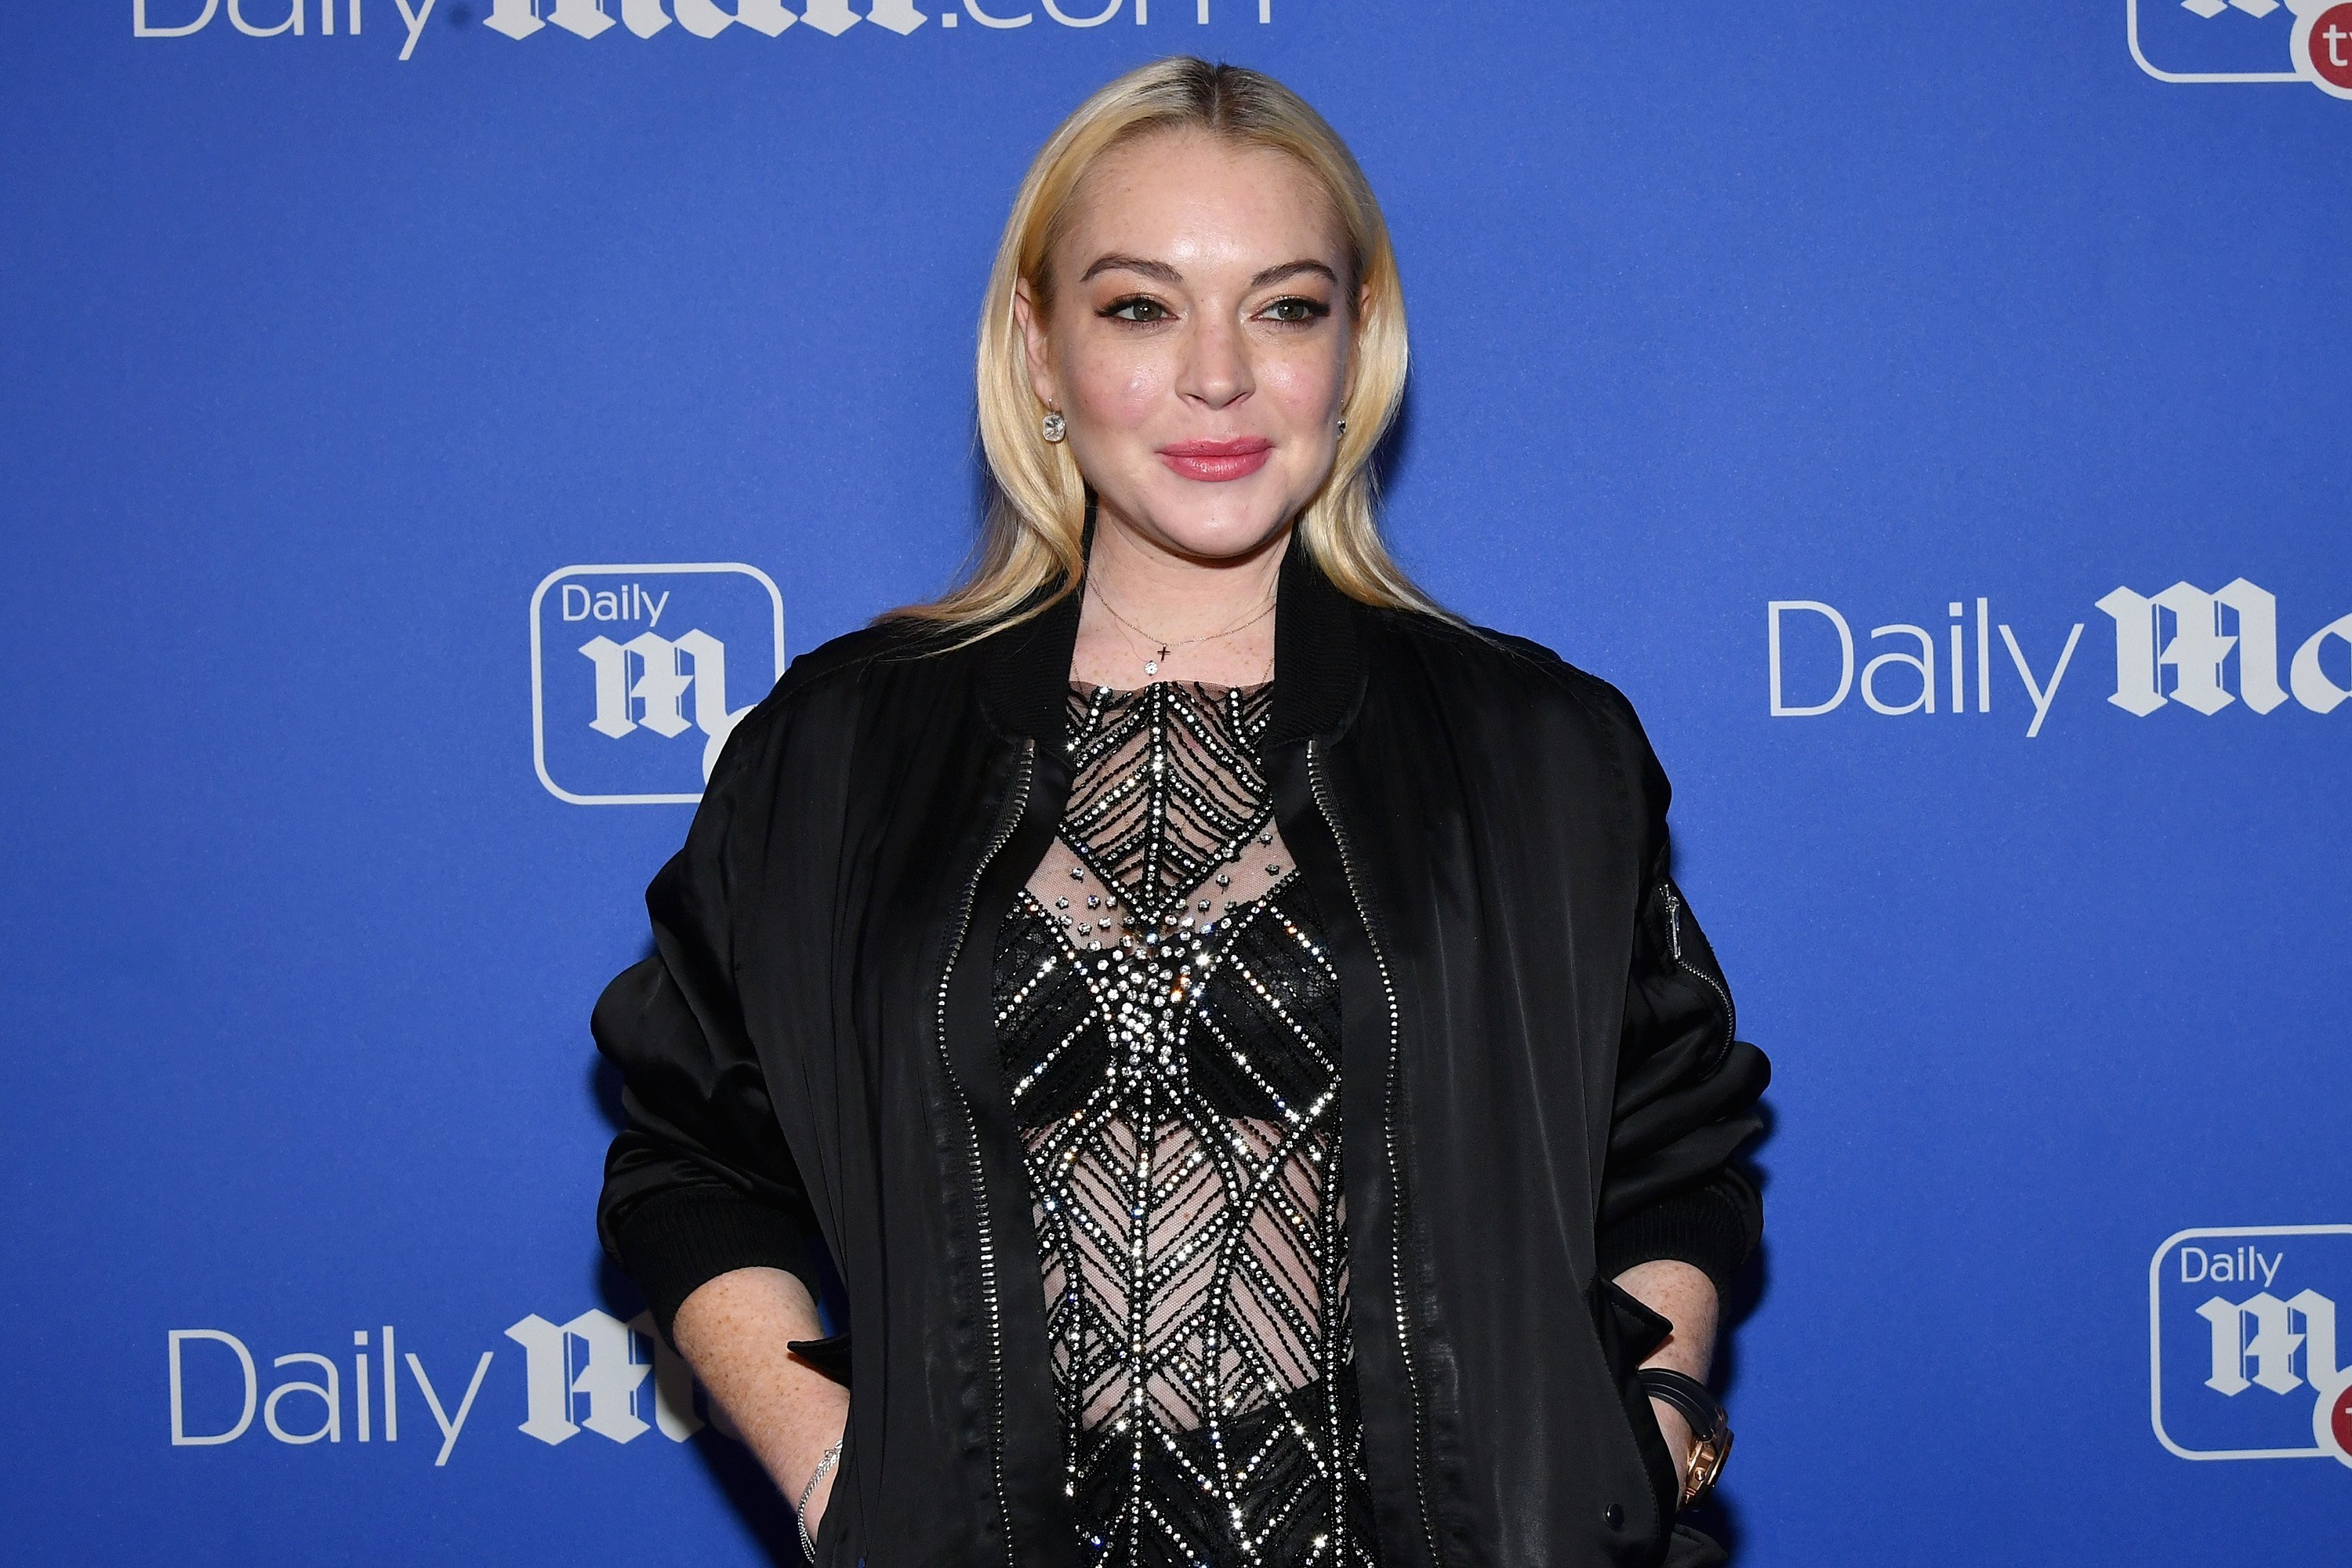 Lindsay Lohan attends a Holiday Party in New York City on December 6, 2017 | Photo: Getty Images